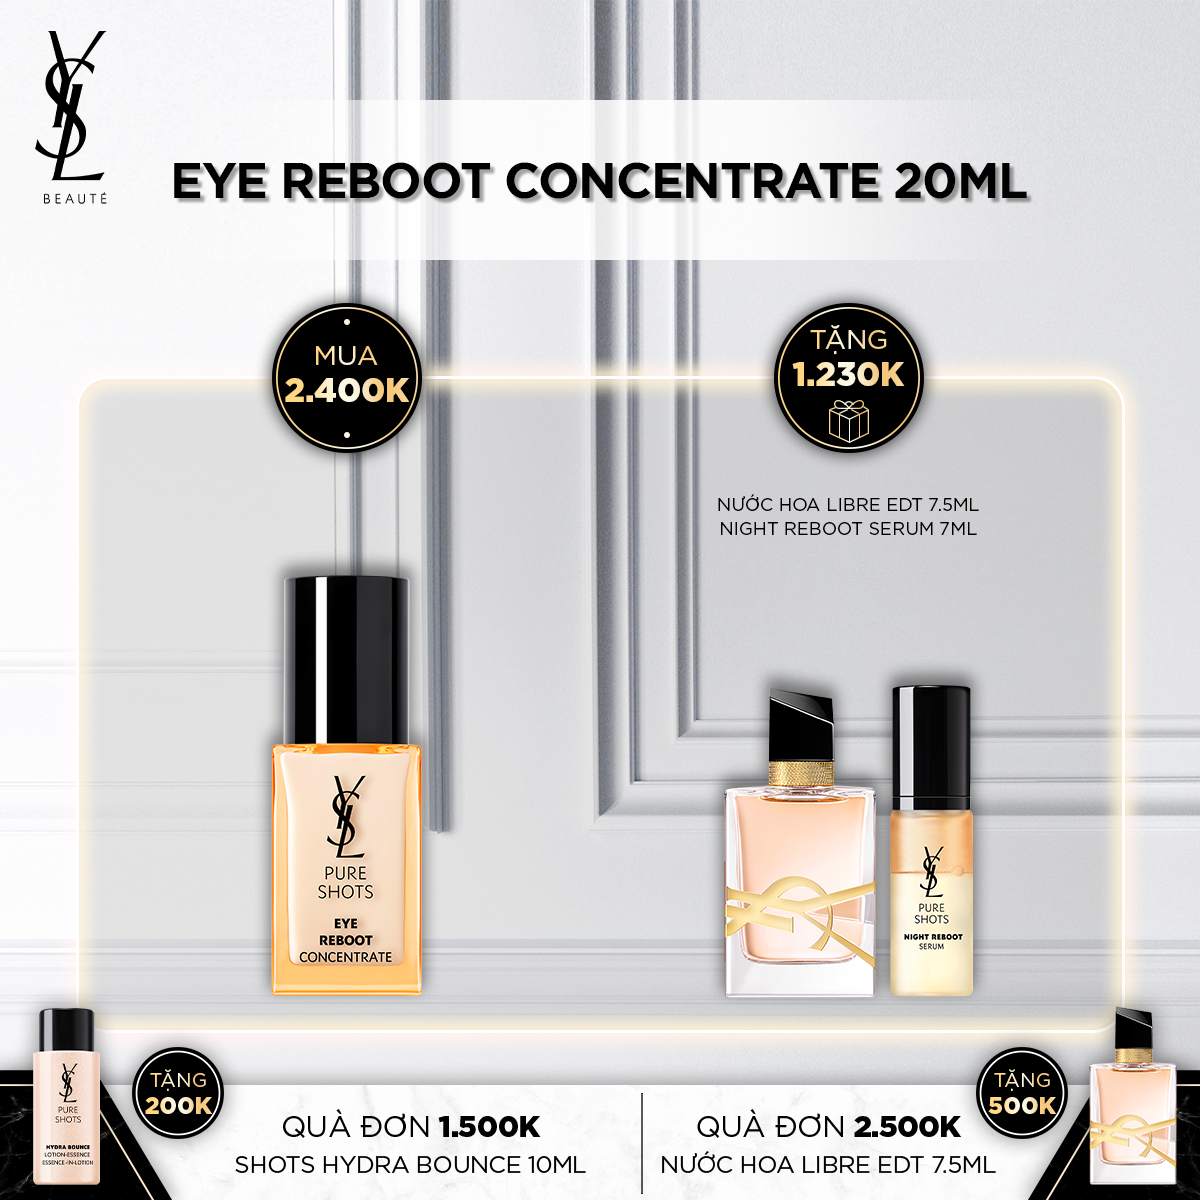 Pure Shots Eye Reboot Concentrate 20ml